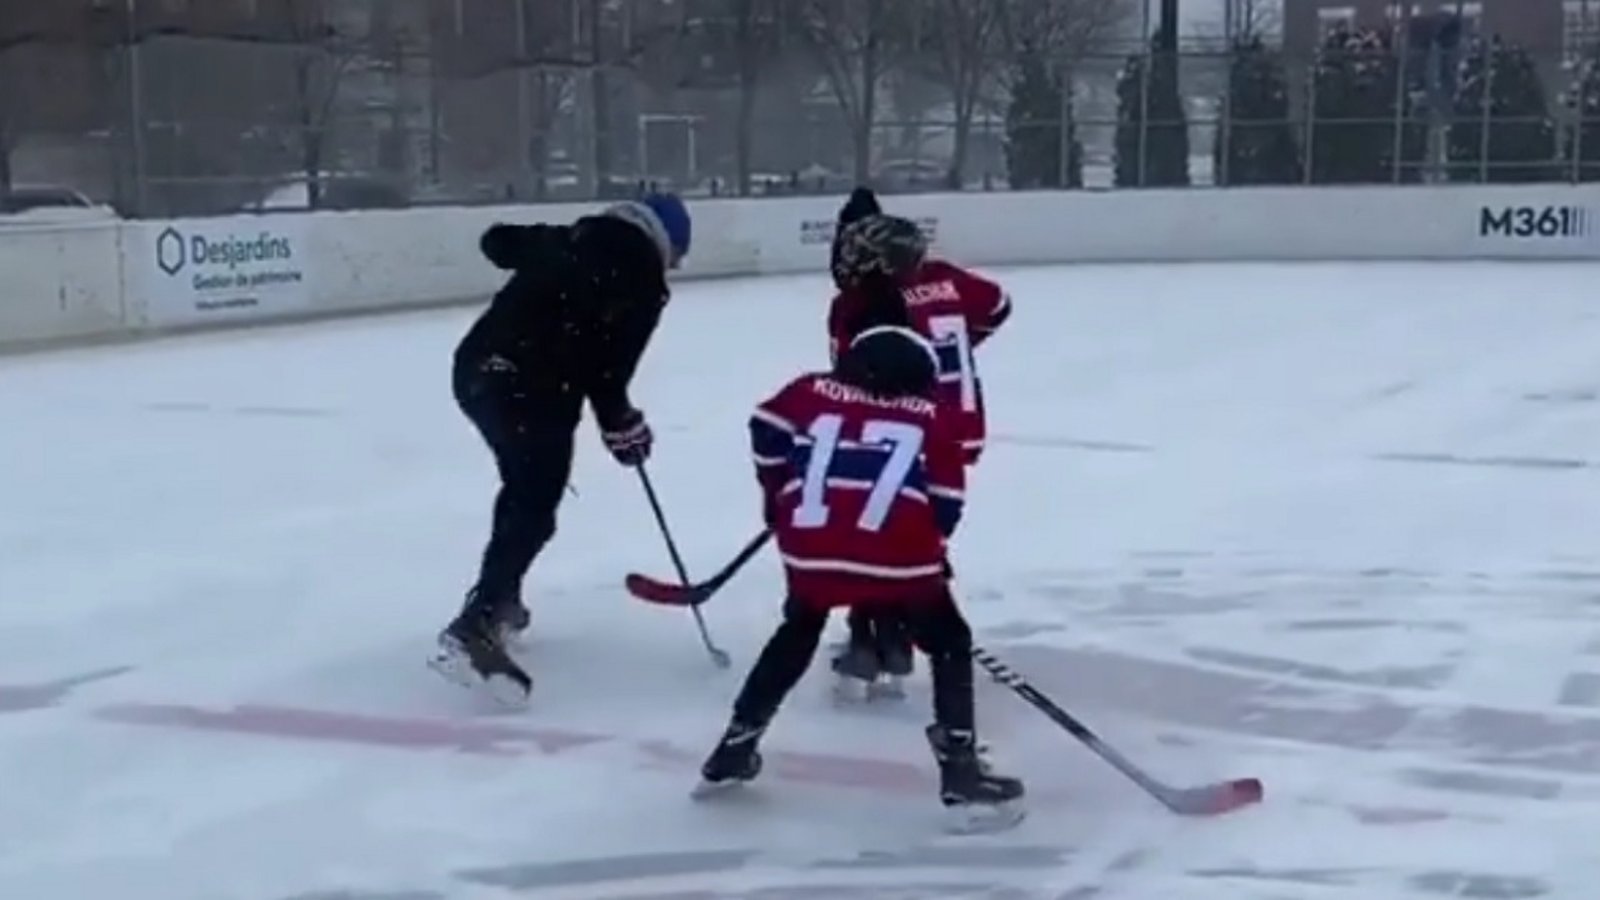 Quarantine workout: NHL star Ilya Kovalchuk shows how to train together  with wife (VIDEO) — RT Sport News